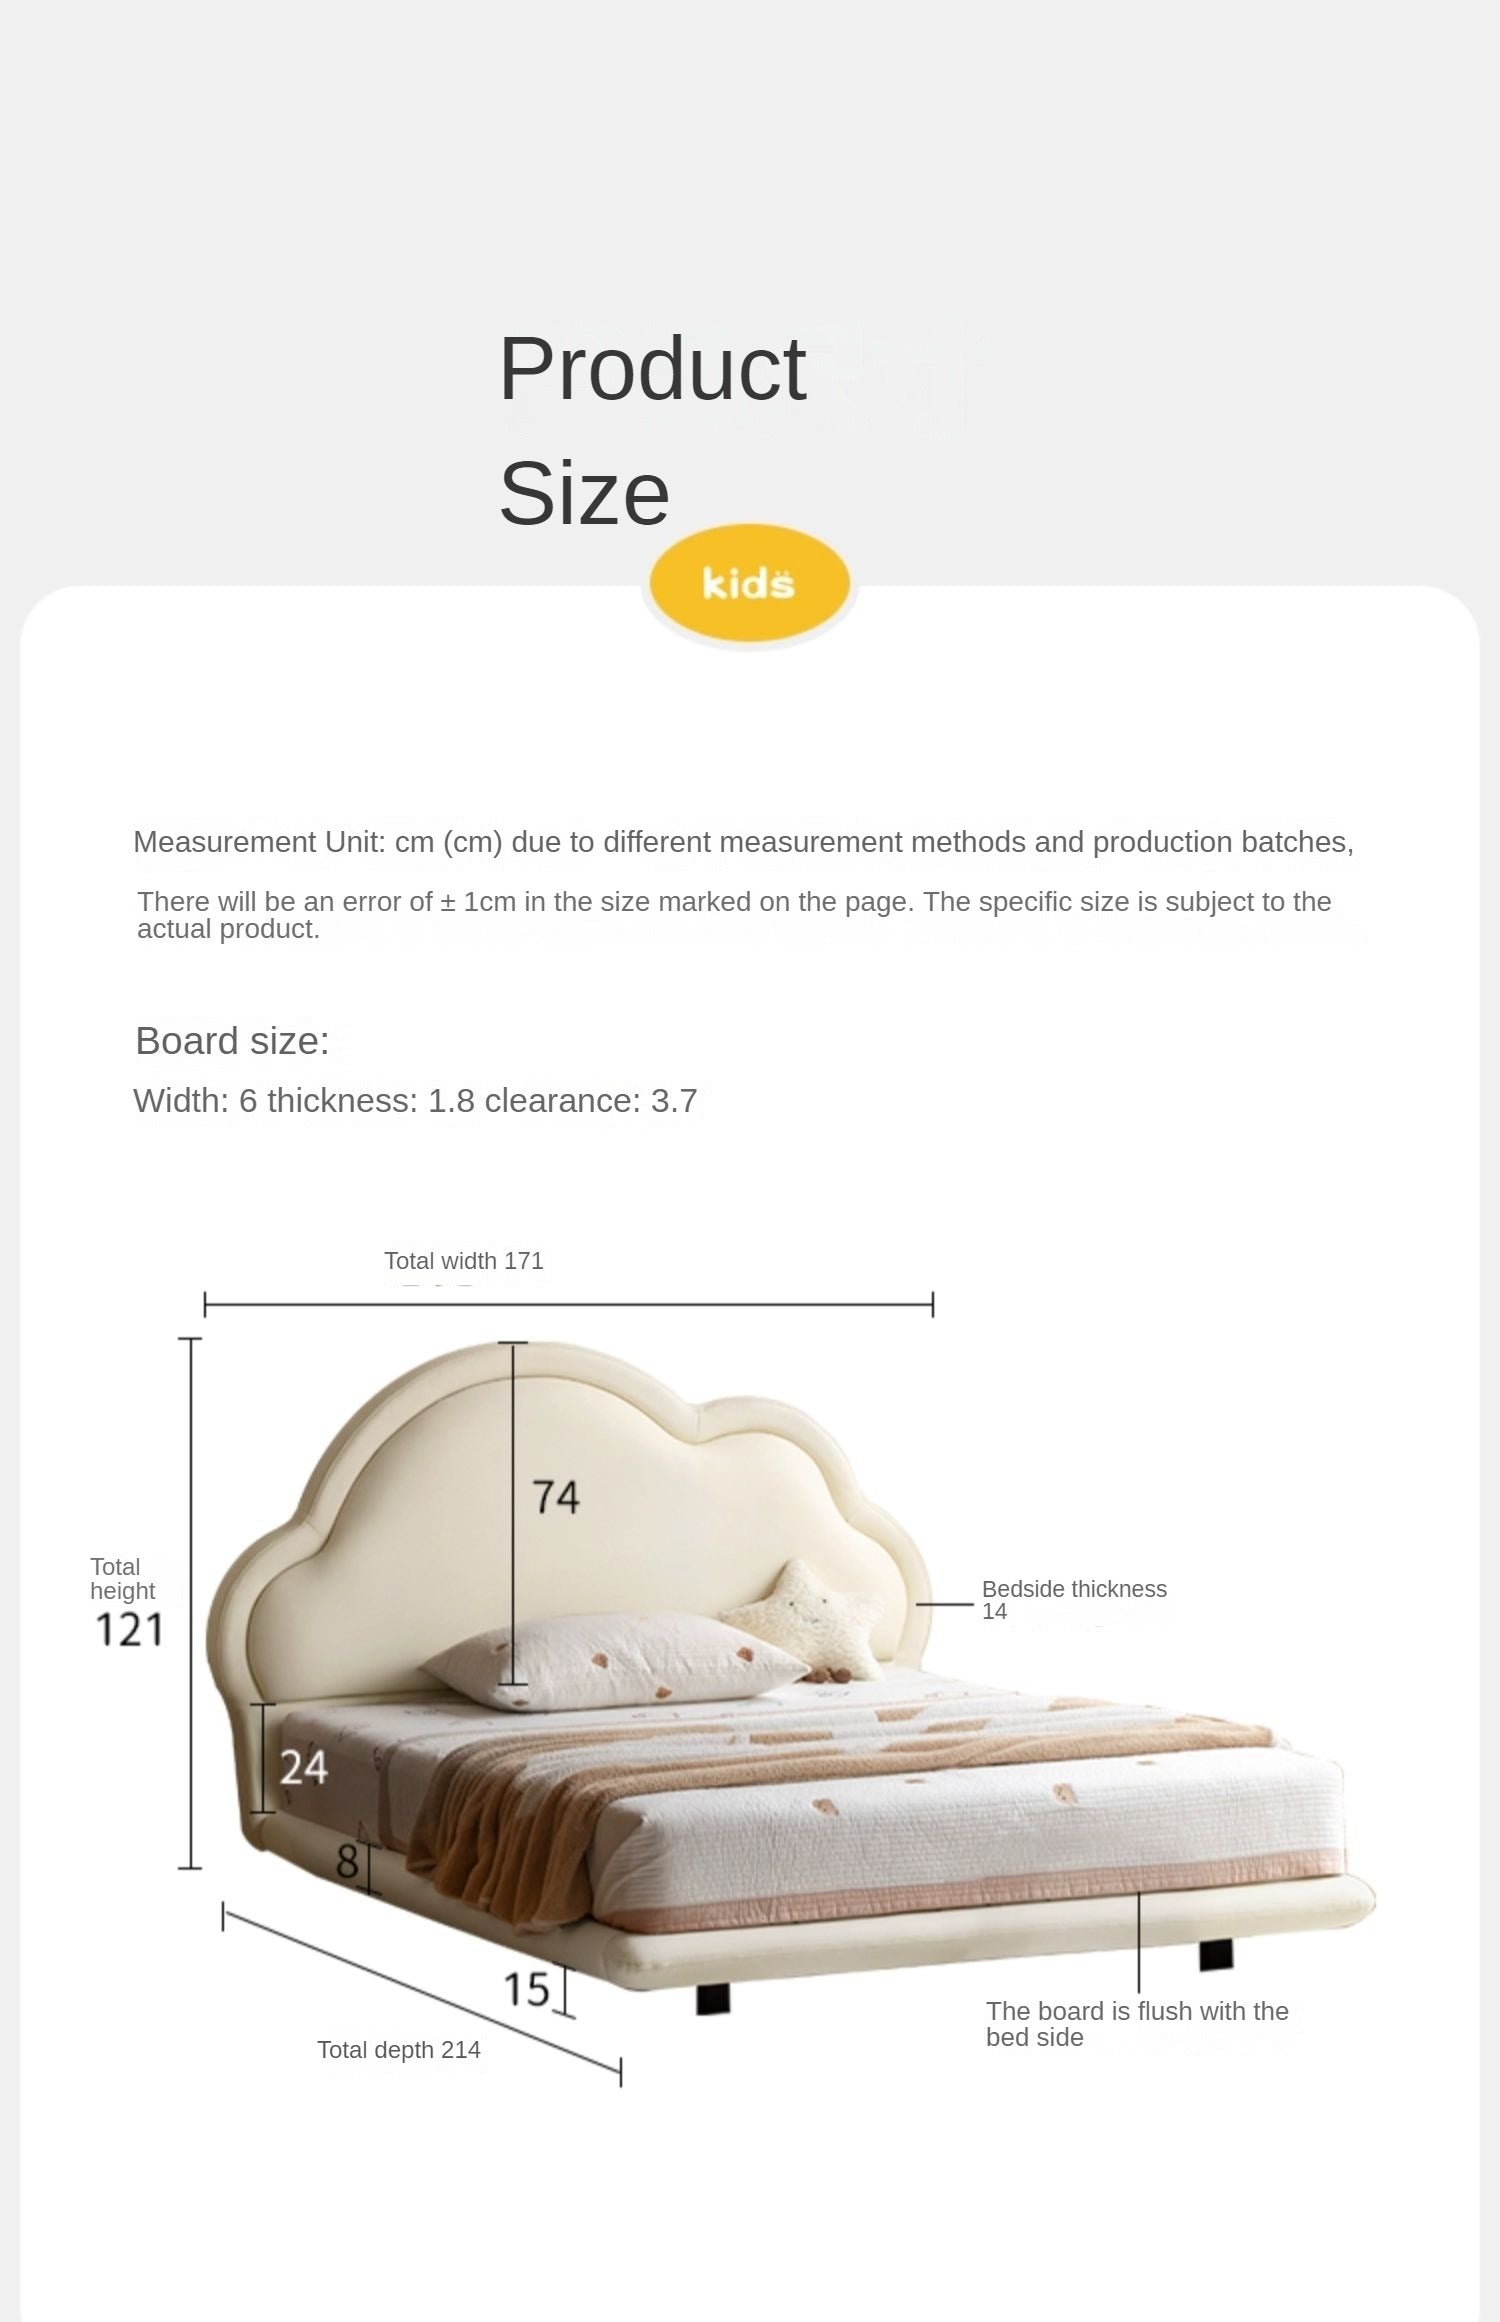 Organic Leather kid's Cloud Bed, suspended bed cream style)